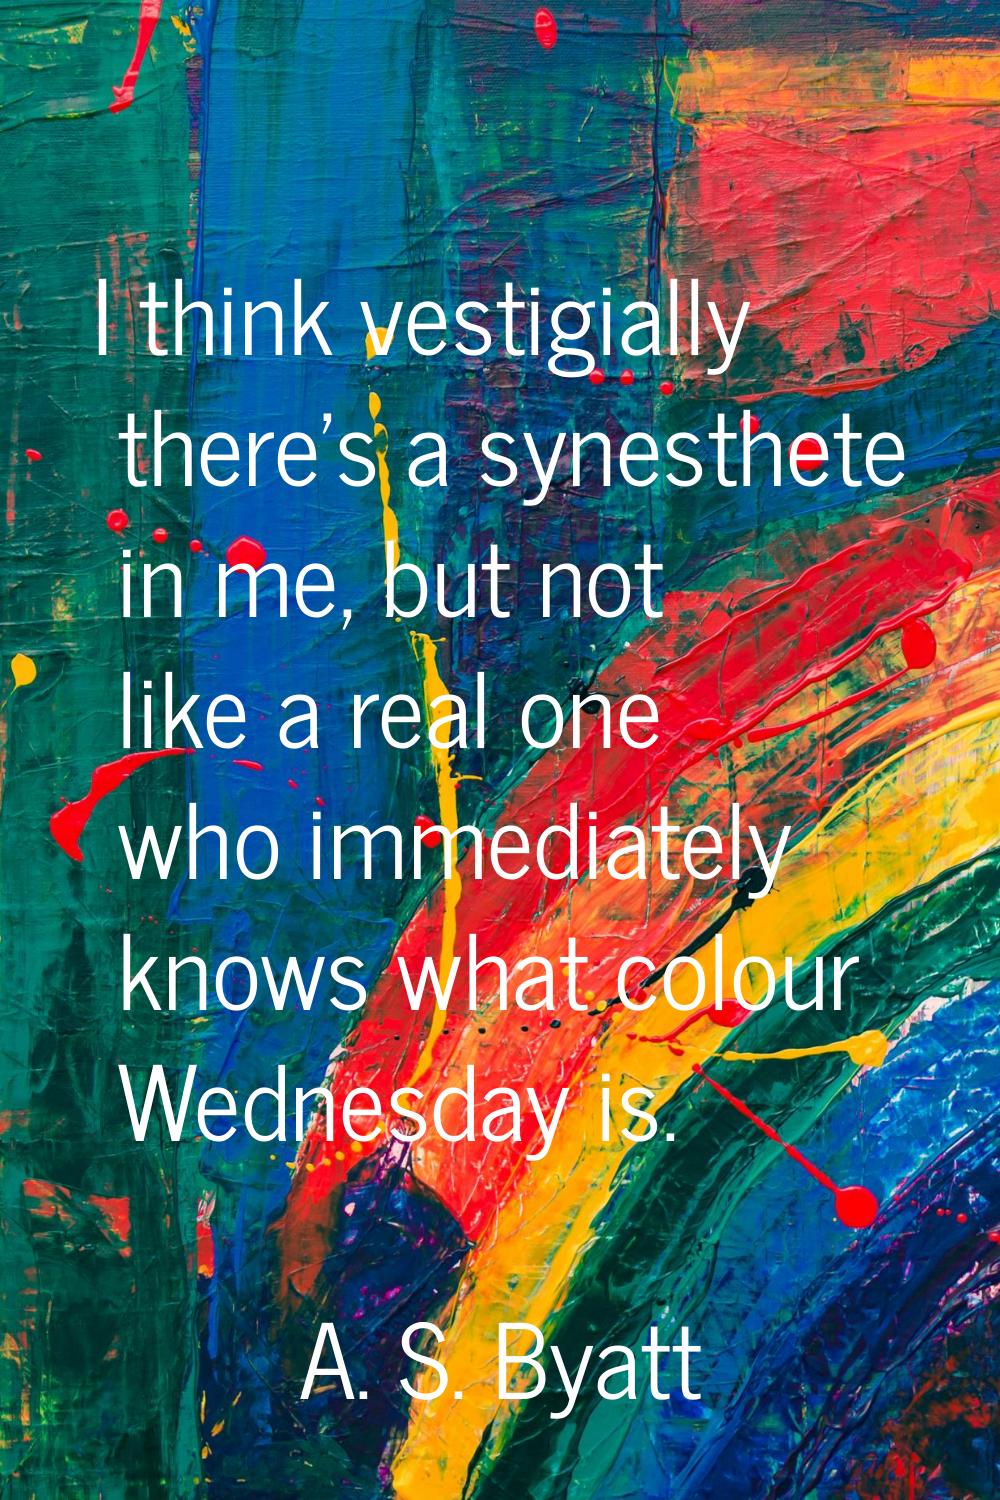 I think vestigially there's a synesthete in me, but not like a real one who immediately knows what 